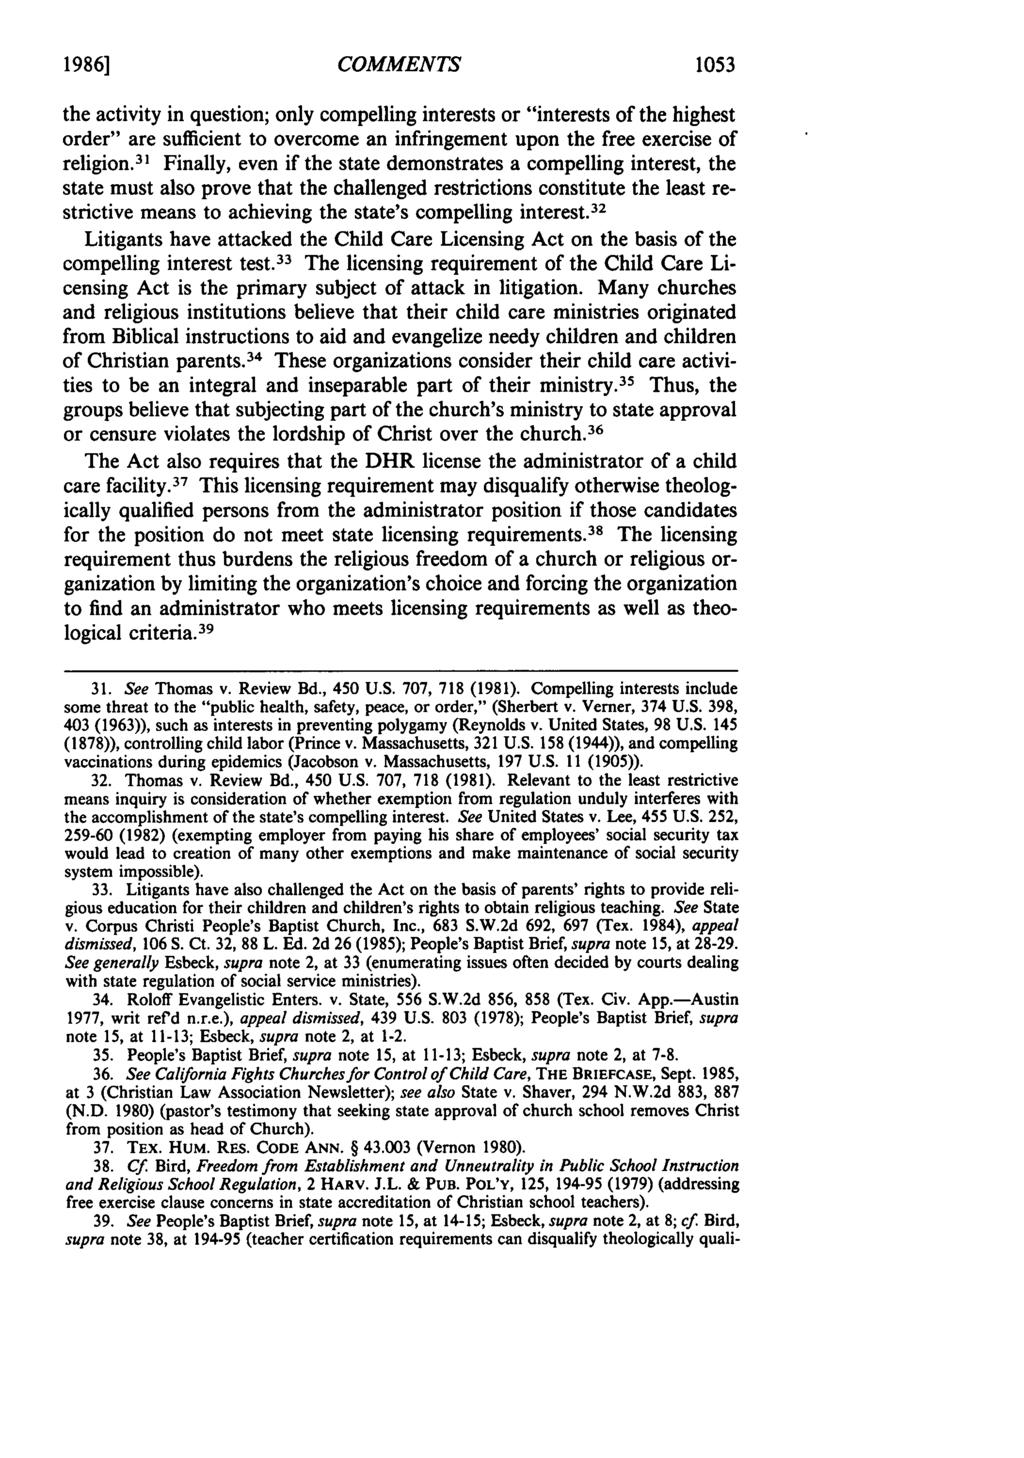 1986] COMMENTS 1053 the activity in question; only compelling interests or "interests of the highest order" are sufficient to overcome an infringement upon the free exercise of religion.